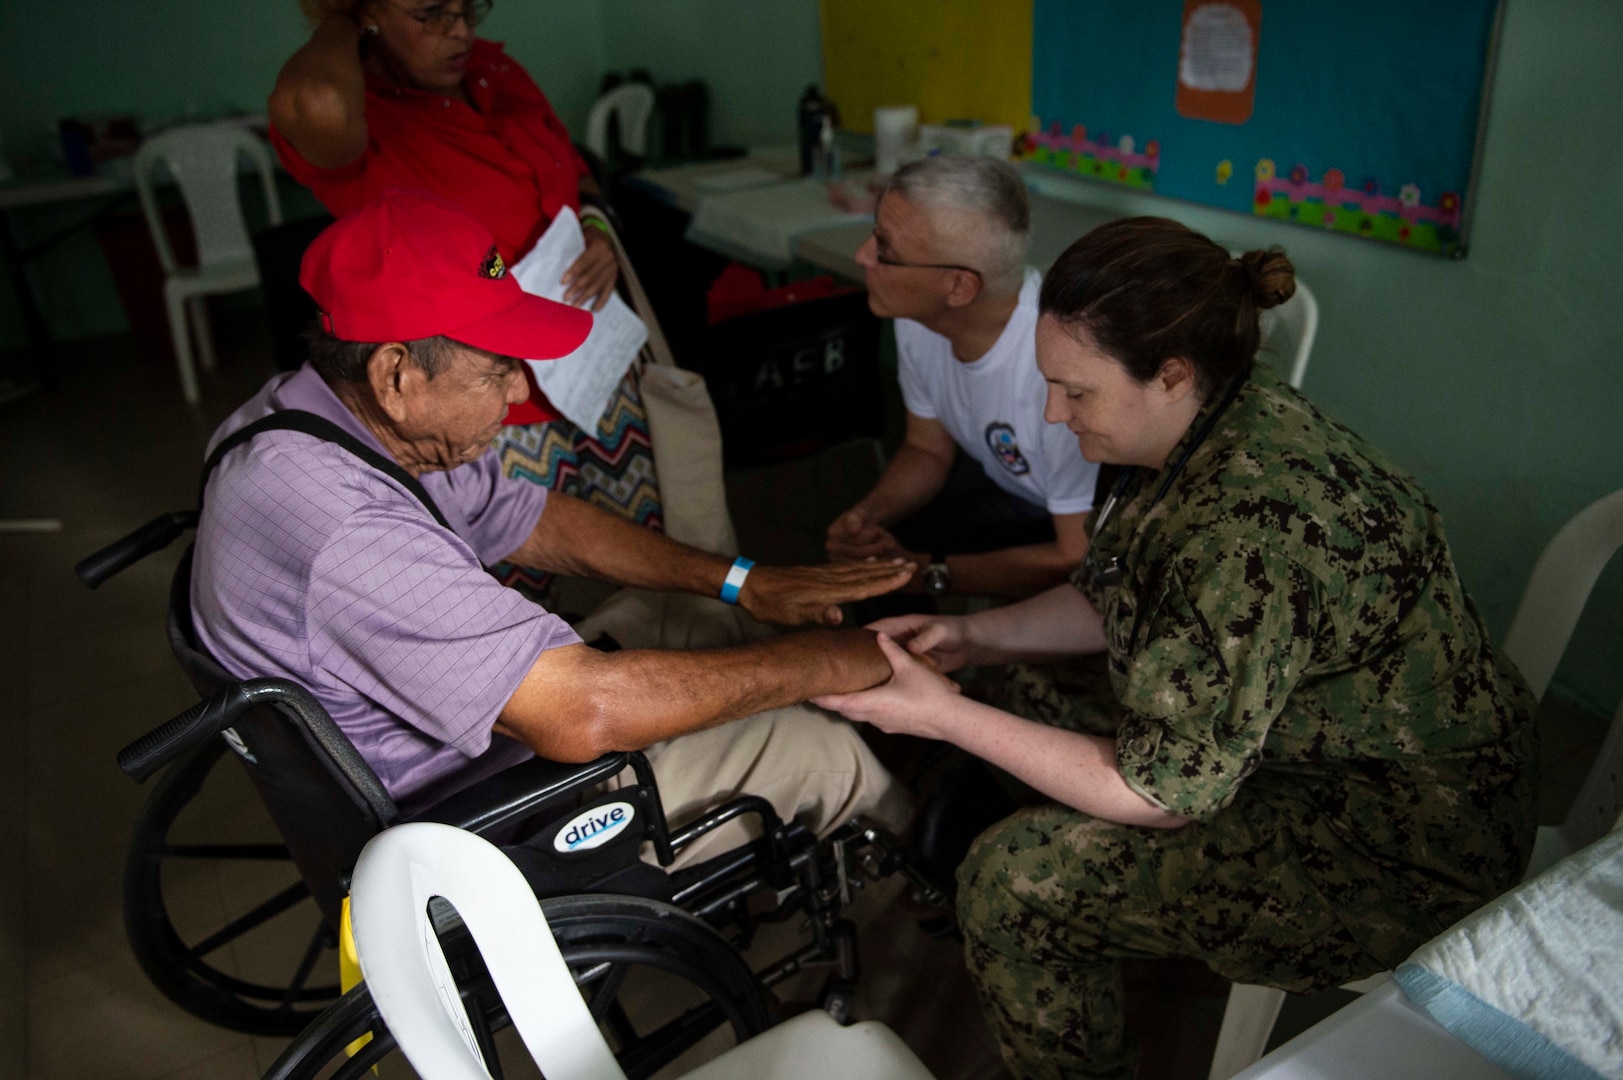 A military doctor examines a patient.